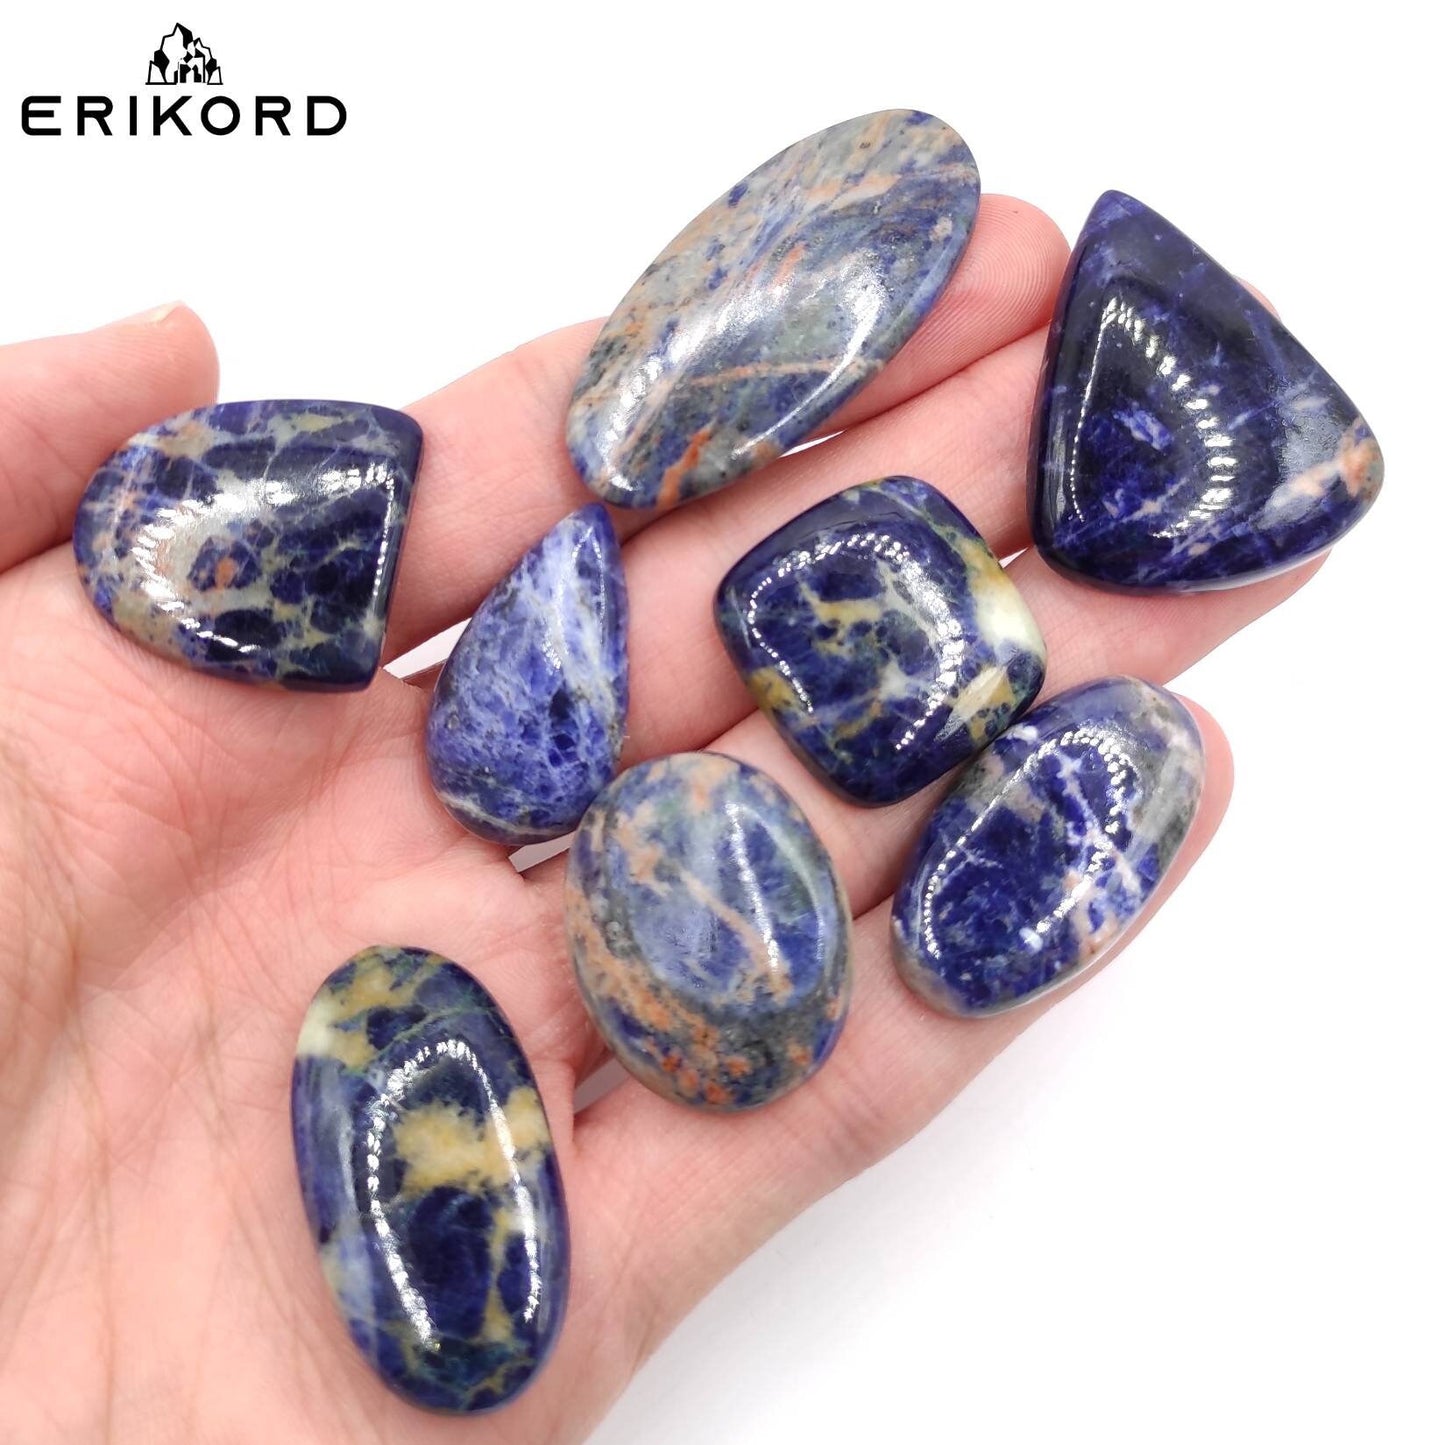 193ct Lot of Sodalite Cabochons Natural Blue Sodalite Mixed Shape Polished Cabochon Lot Natural Sodalite from Russia Loose Cabochon Gems